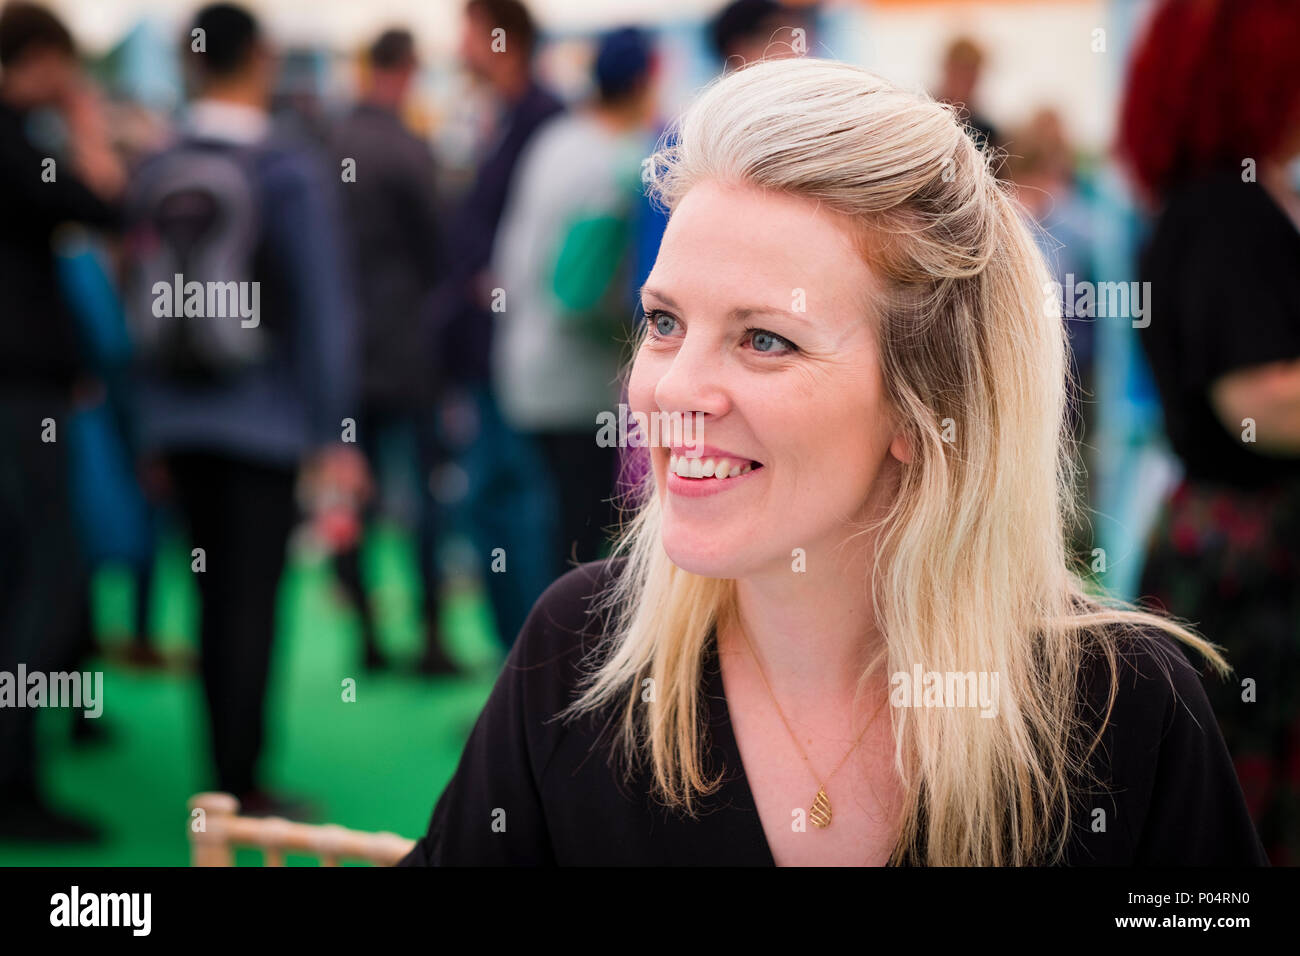 Sarah Crossan,  Irish author. Best known for her books for young adults, including Apple and Rain and One, for which she has won several awards.   At the Hay Festival  of Literature and the Arts, May 2018 Stock Photo